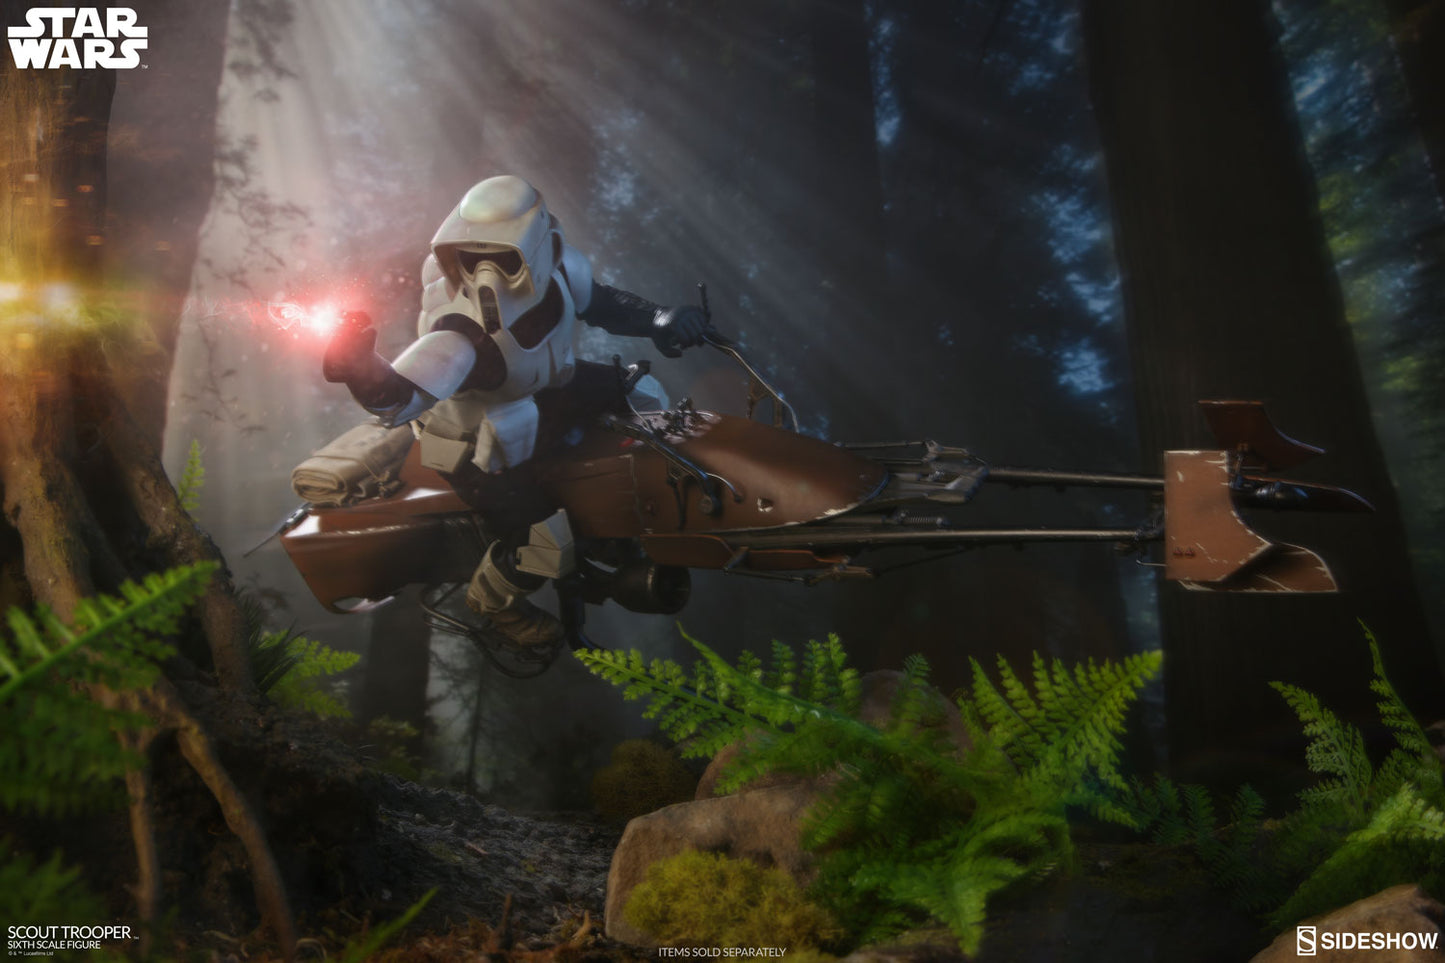 Scout Trooper - Sixth Scale Figure (Sideshow Collectibles)